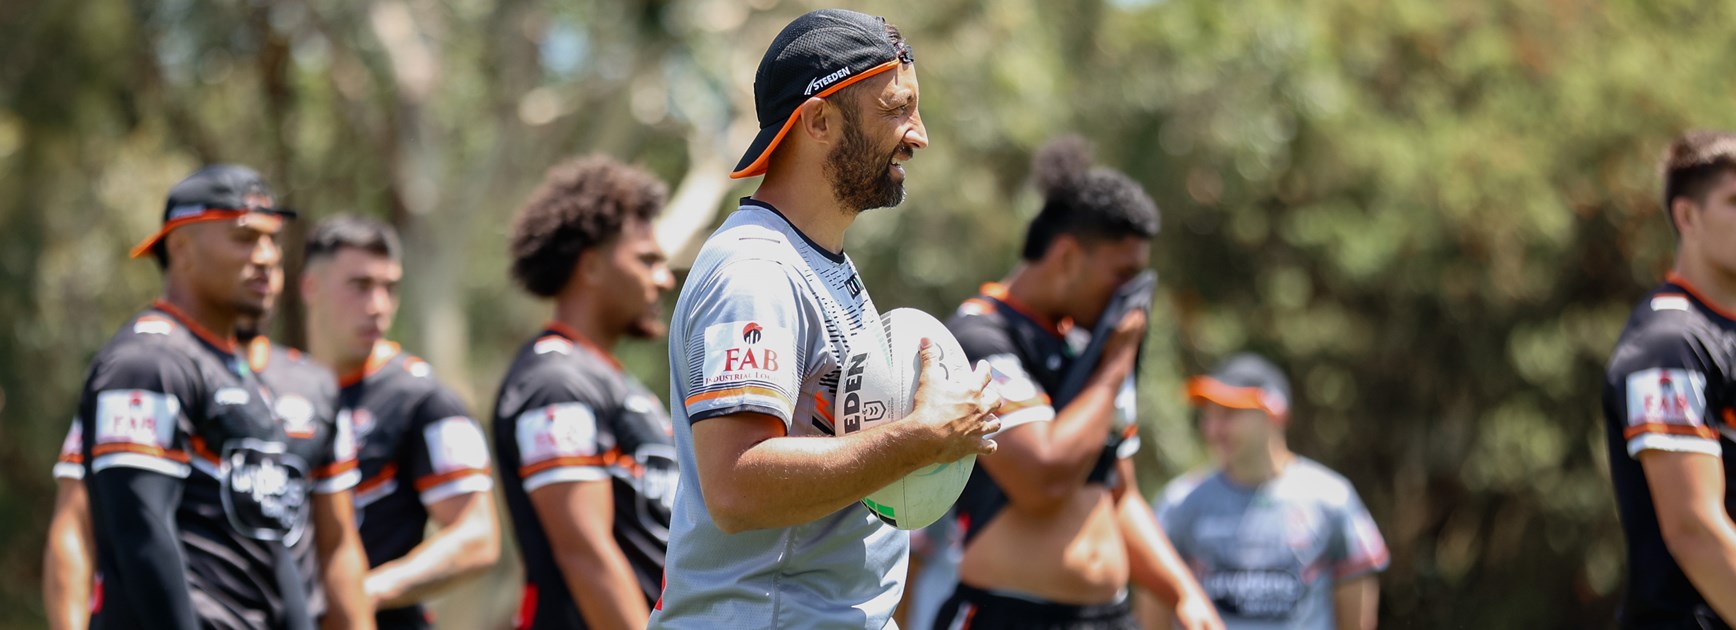 Marshall: Why Wests Tigers are ready to rise